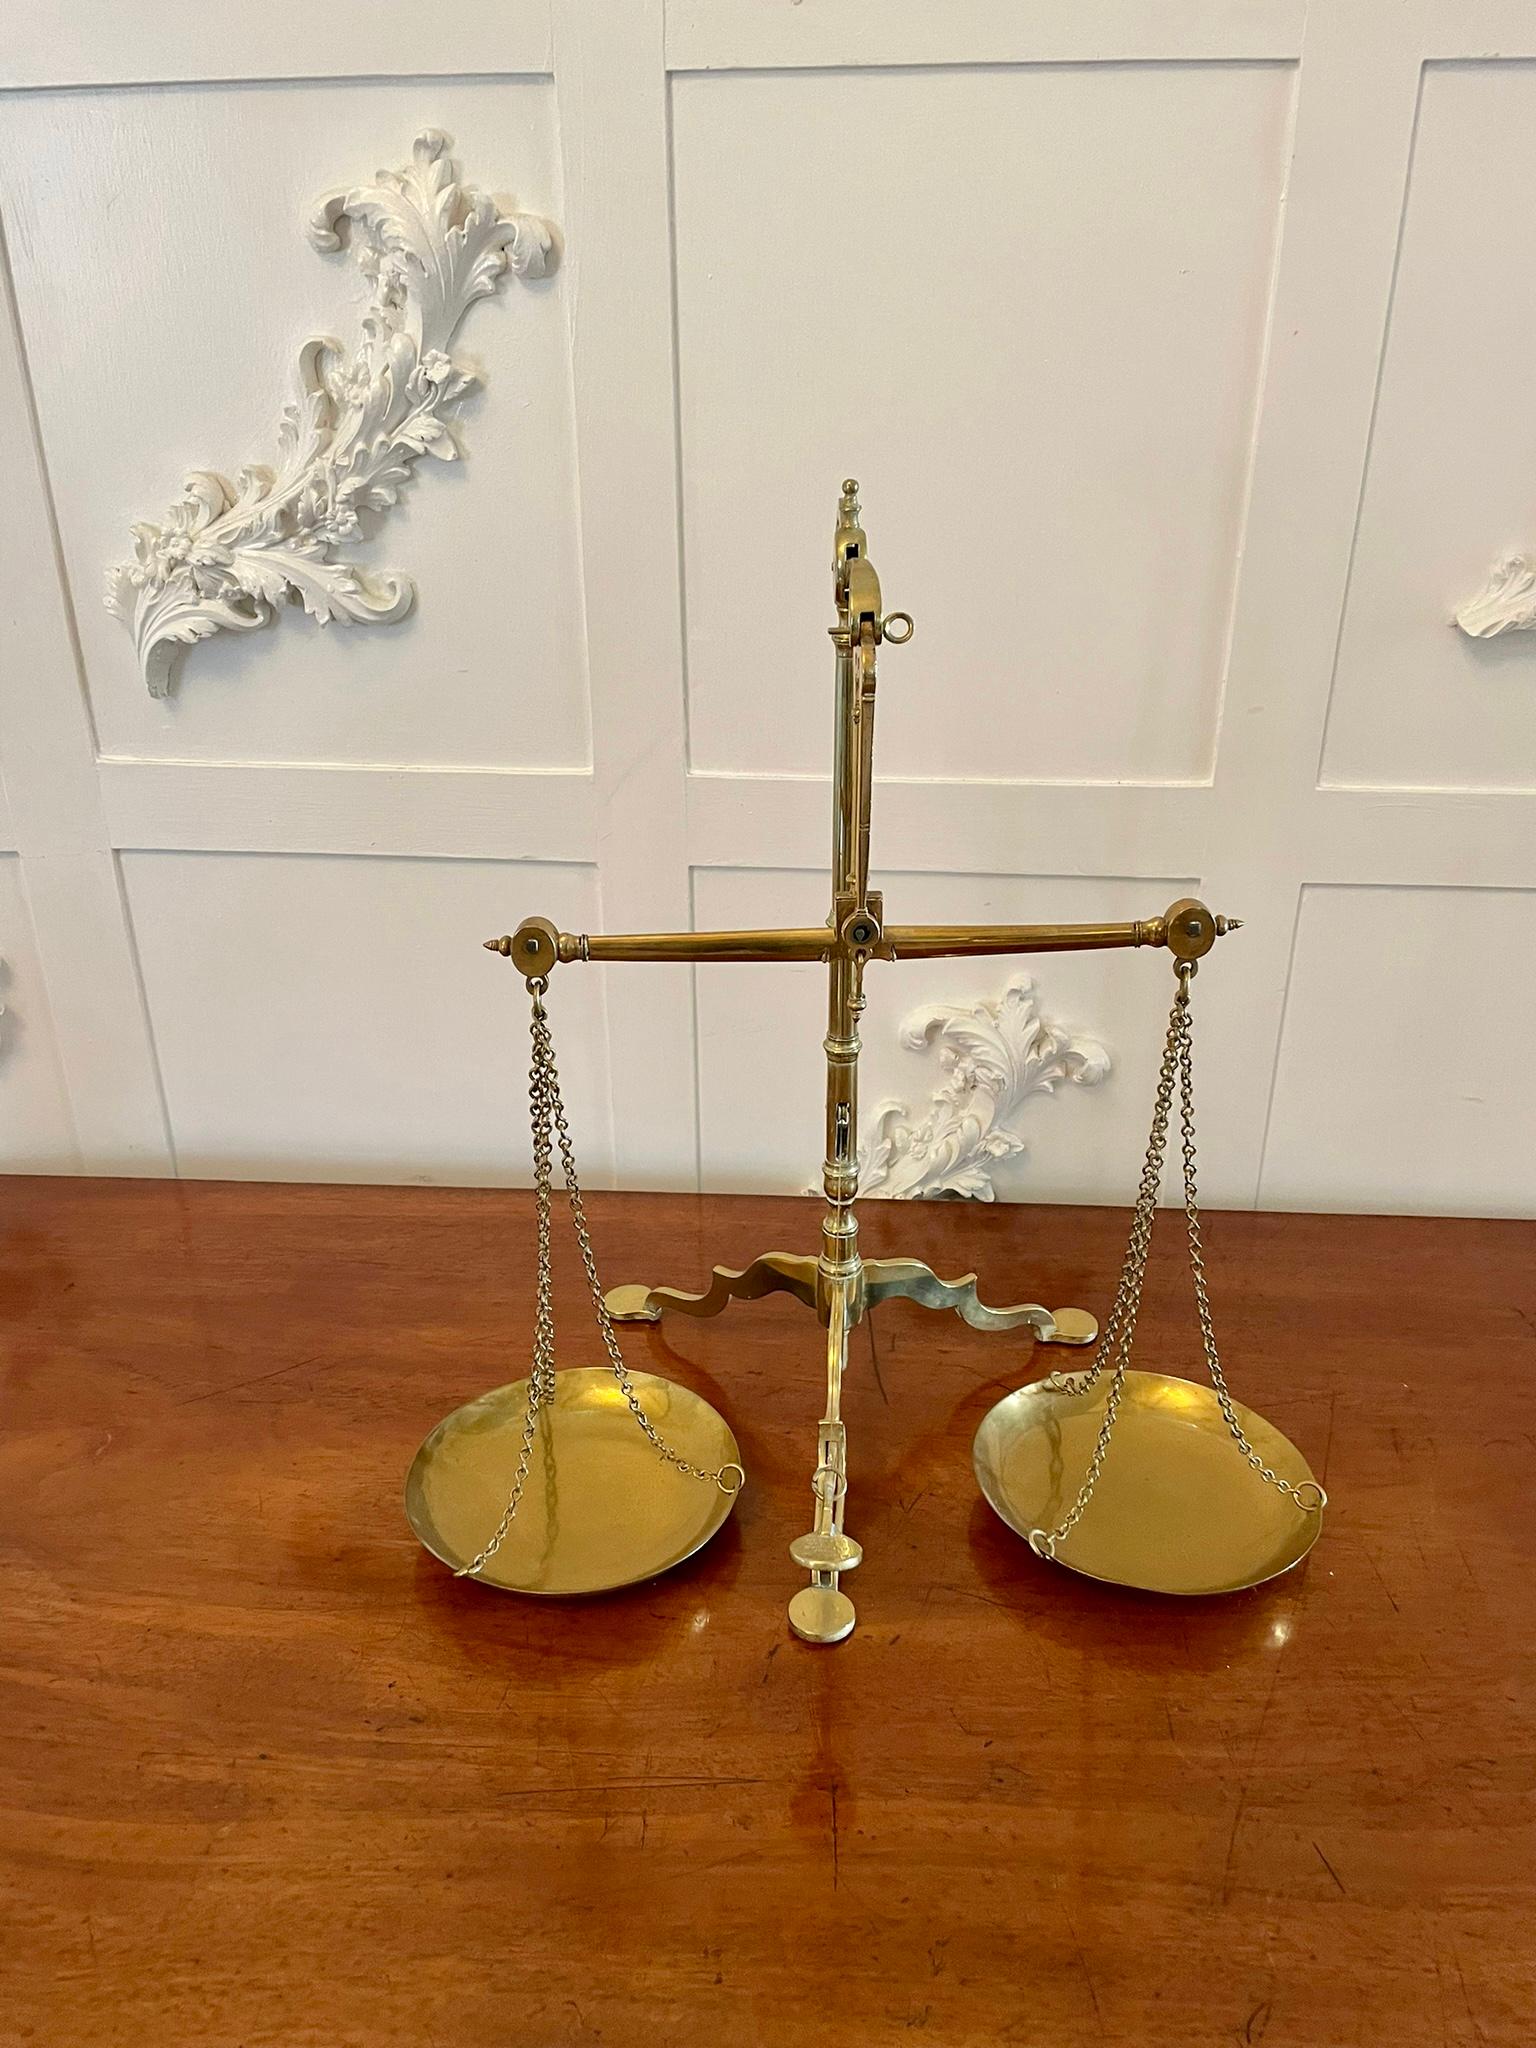 Quality antique Victorian brass scales having a quality set of brass scales with 2 circular brass pans standing on a brass tripod base

Quaint examples in lovely original condition

H 49.2 x W 49 x D 32cm
Date 1860
